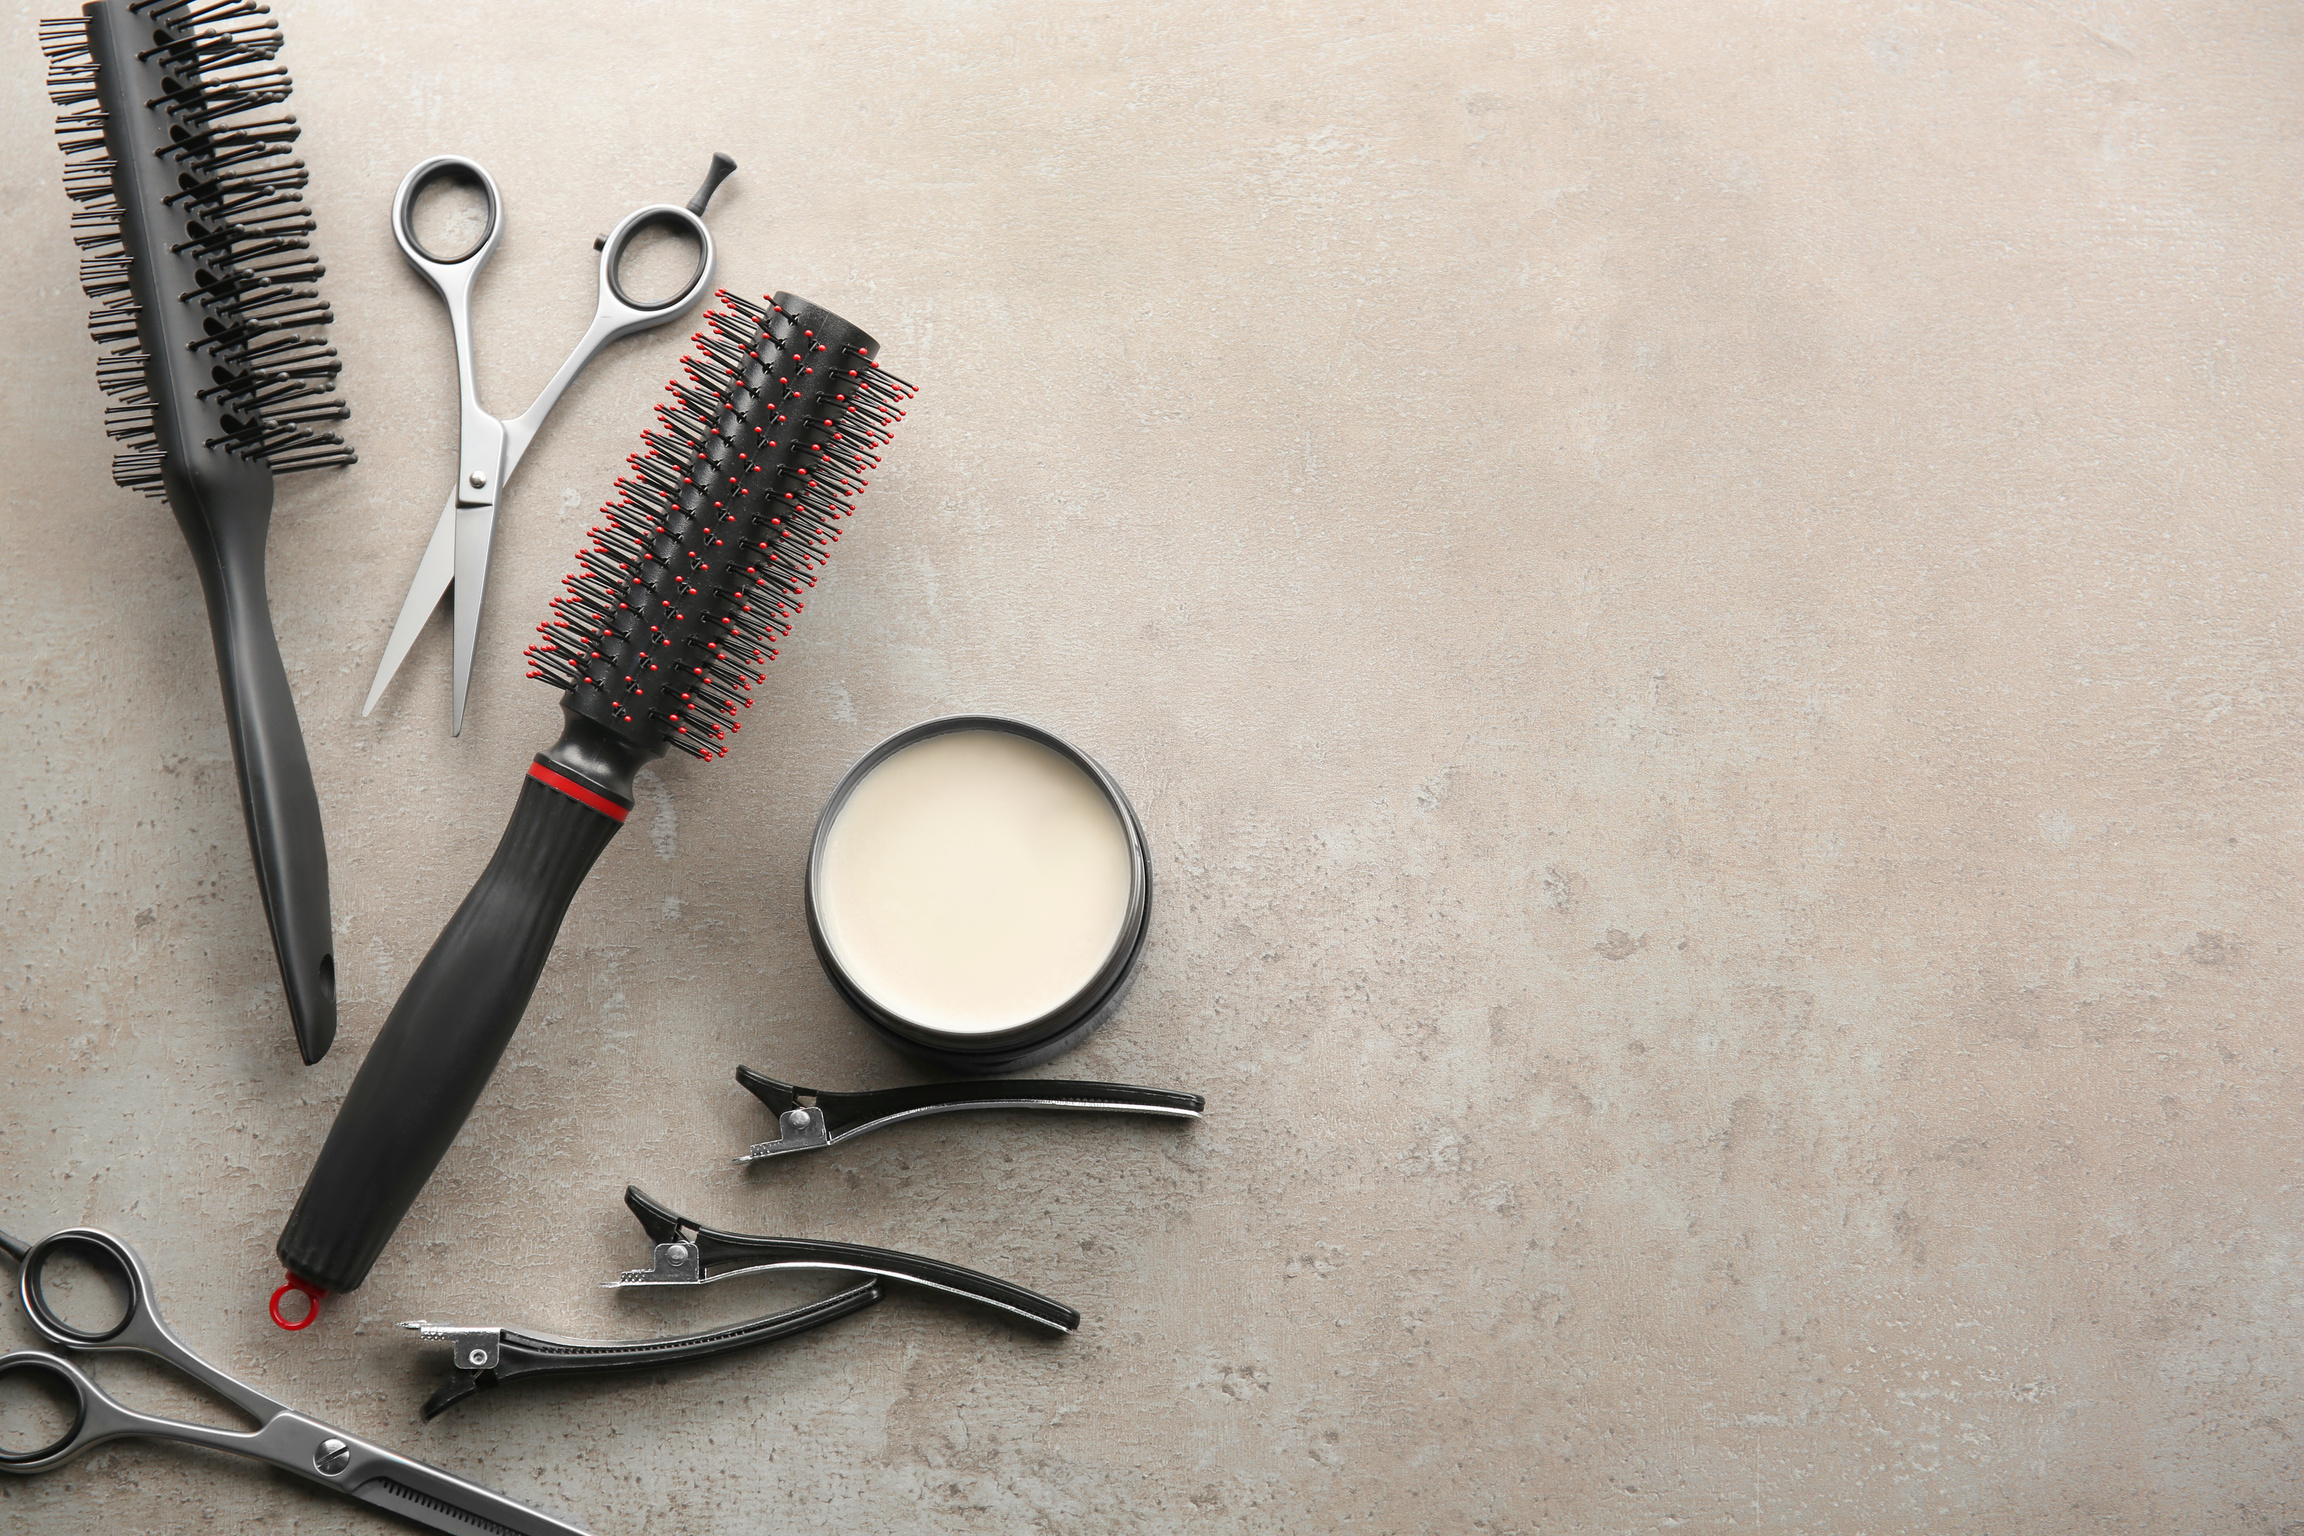 Professional Hairdresser's Tools and Clay for Hair